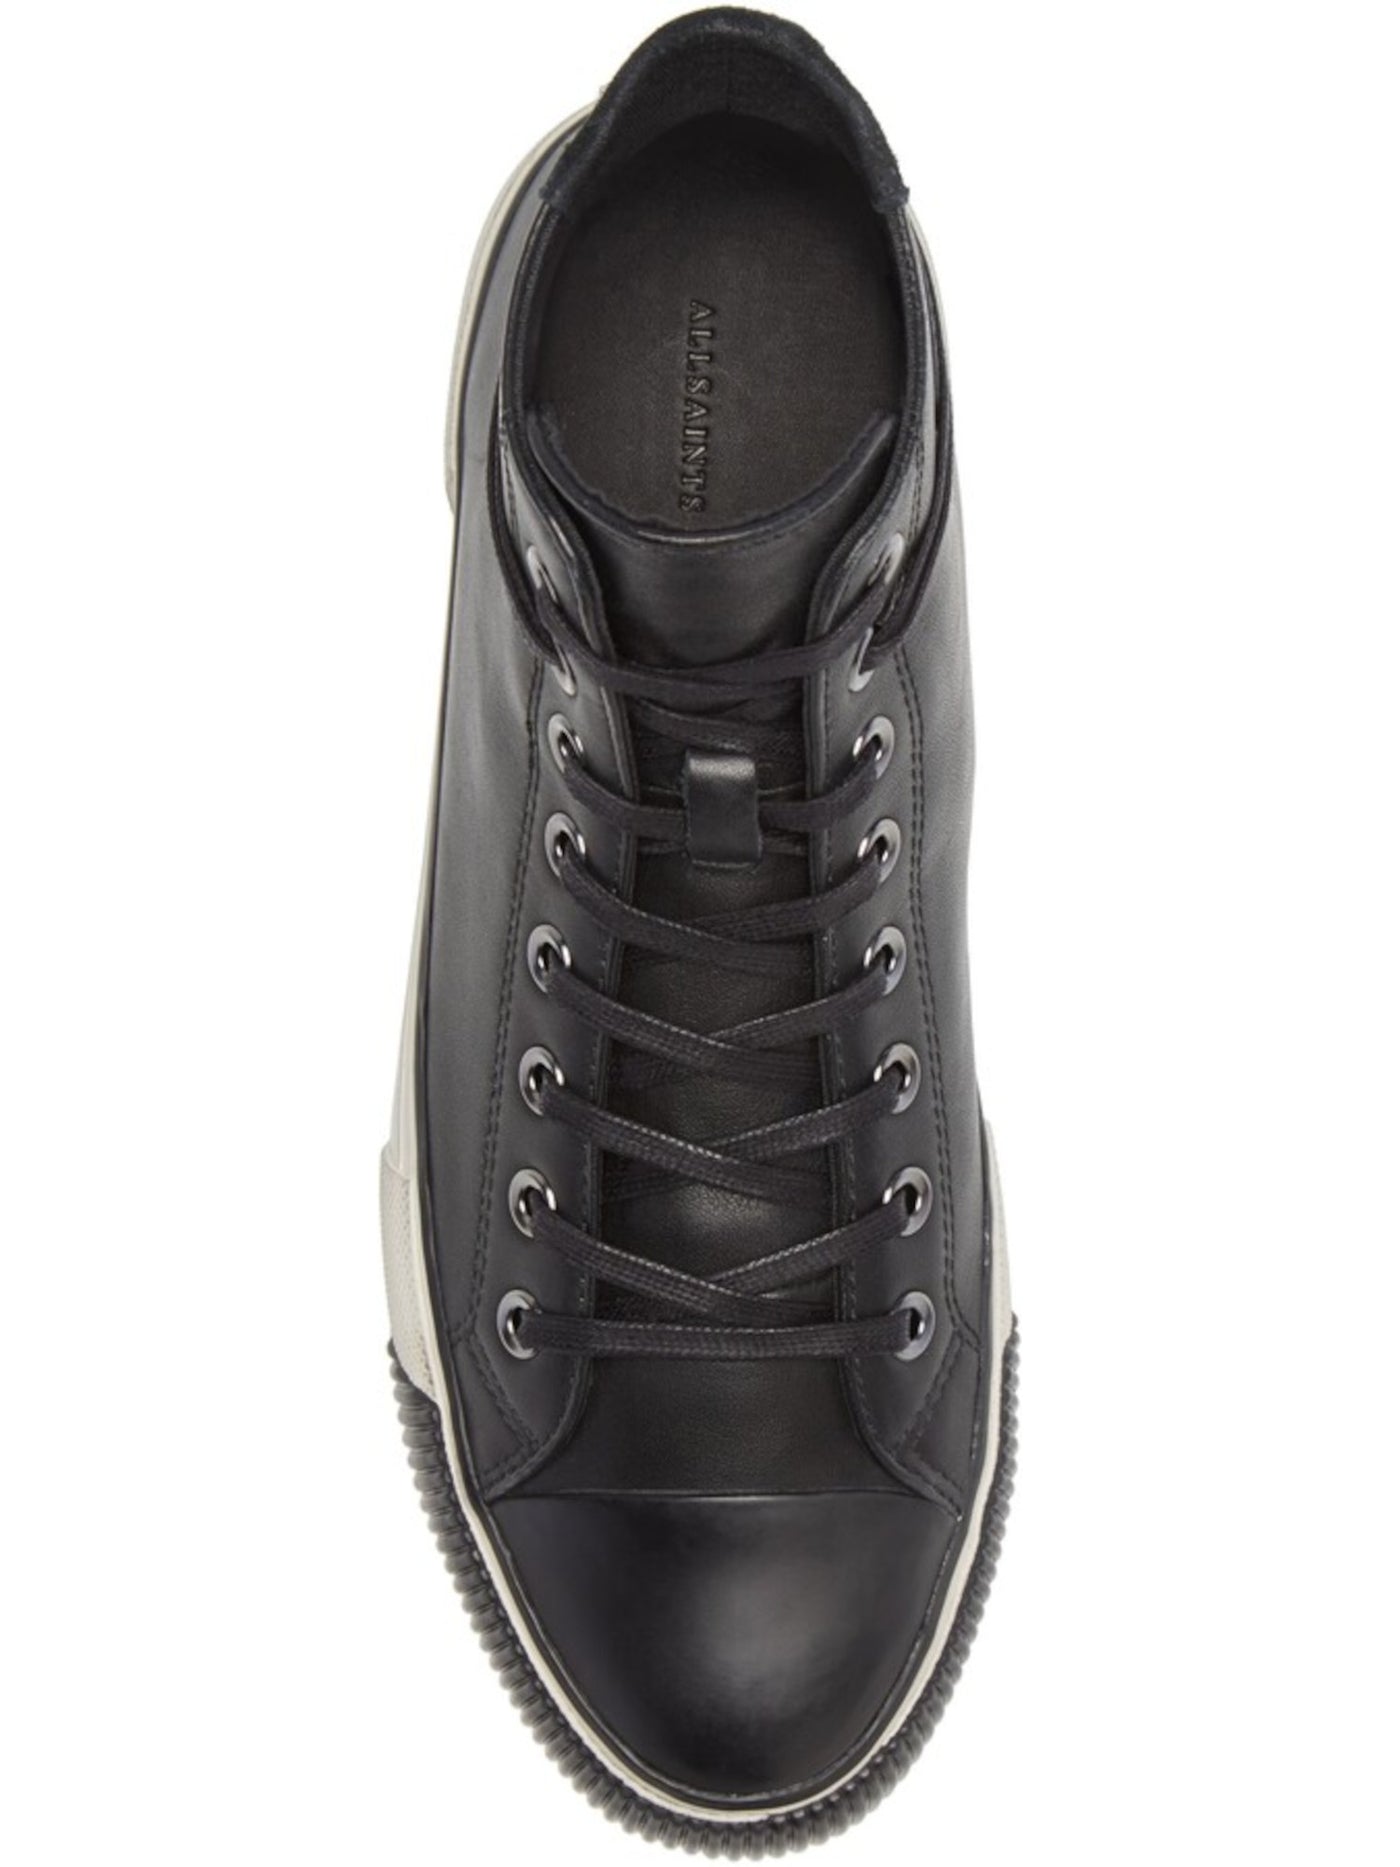 ALLSAINTS Mens Black Osun Round Toe Platform Lace-Up Leather Athletic Sneakers Shoes 44